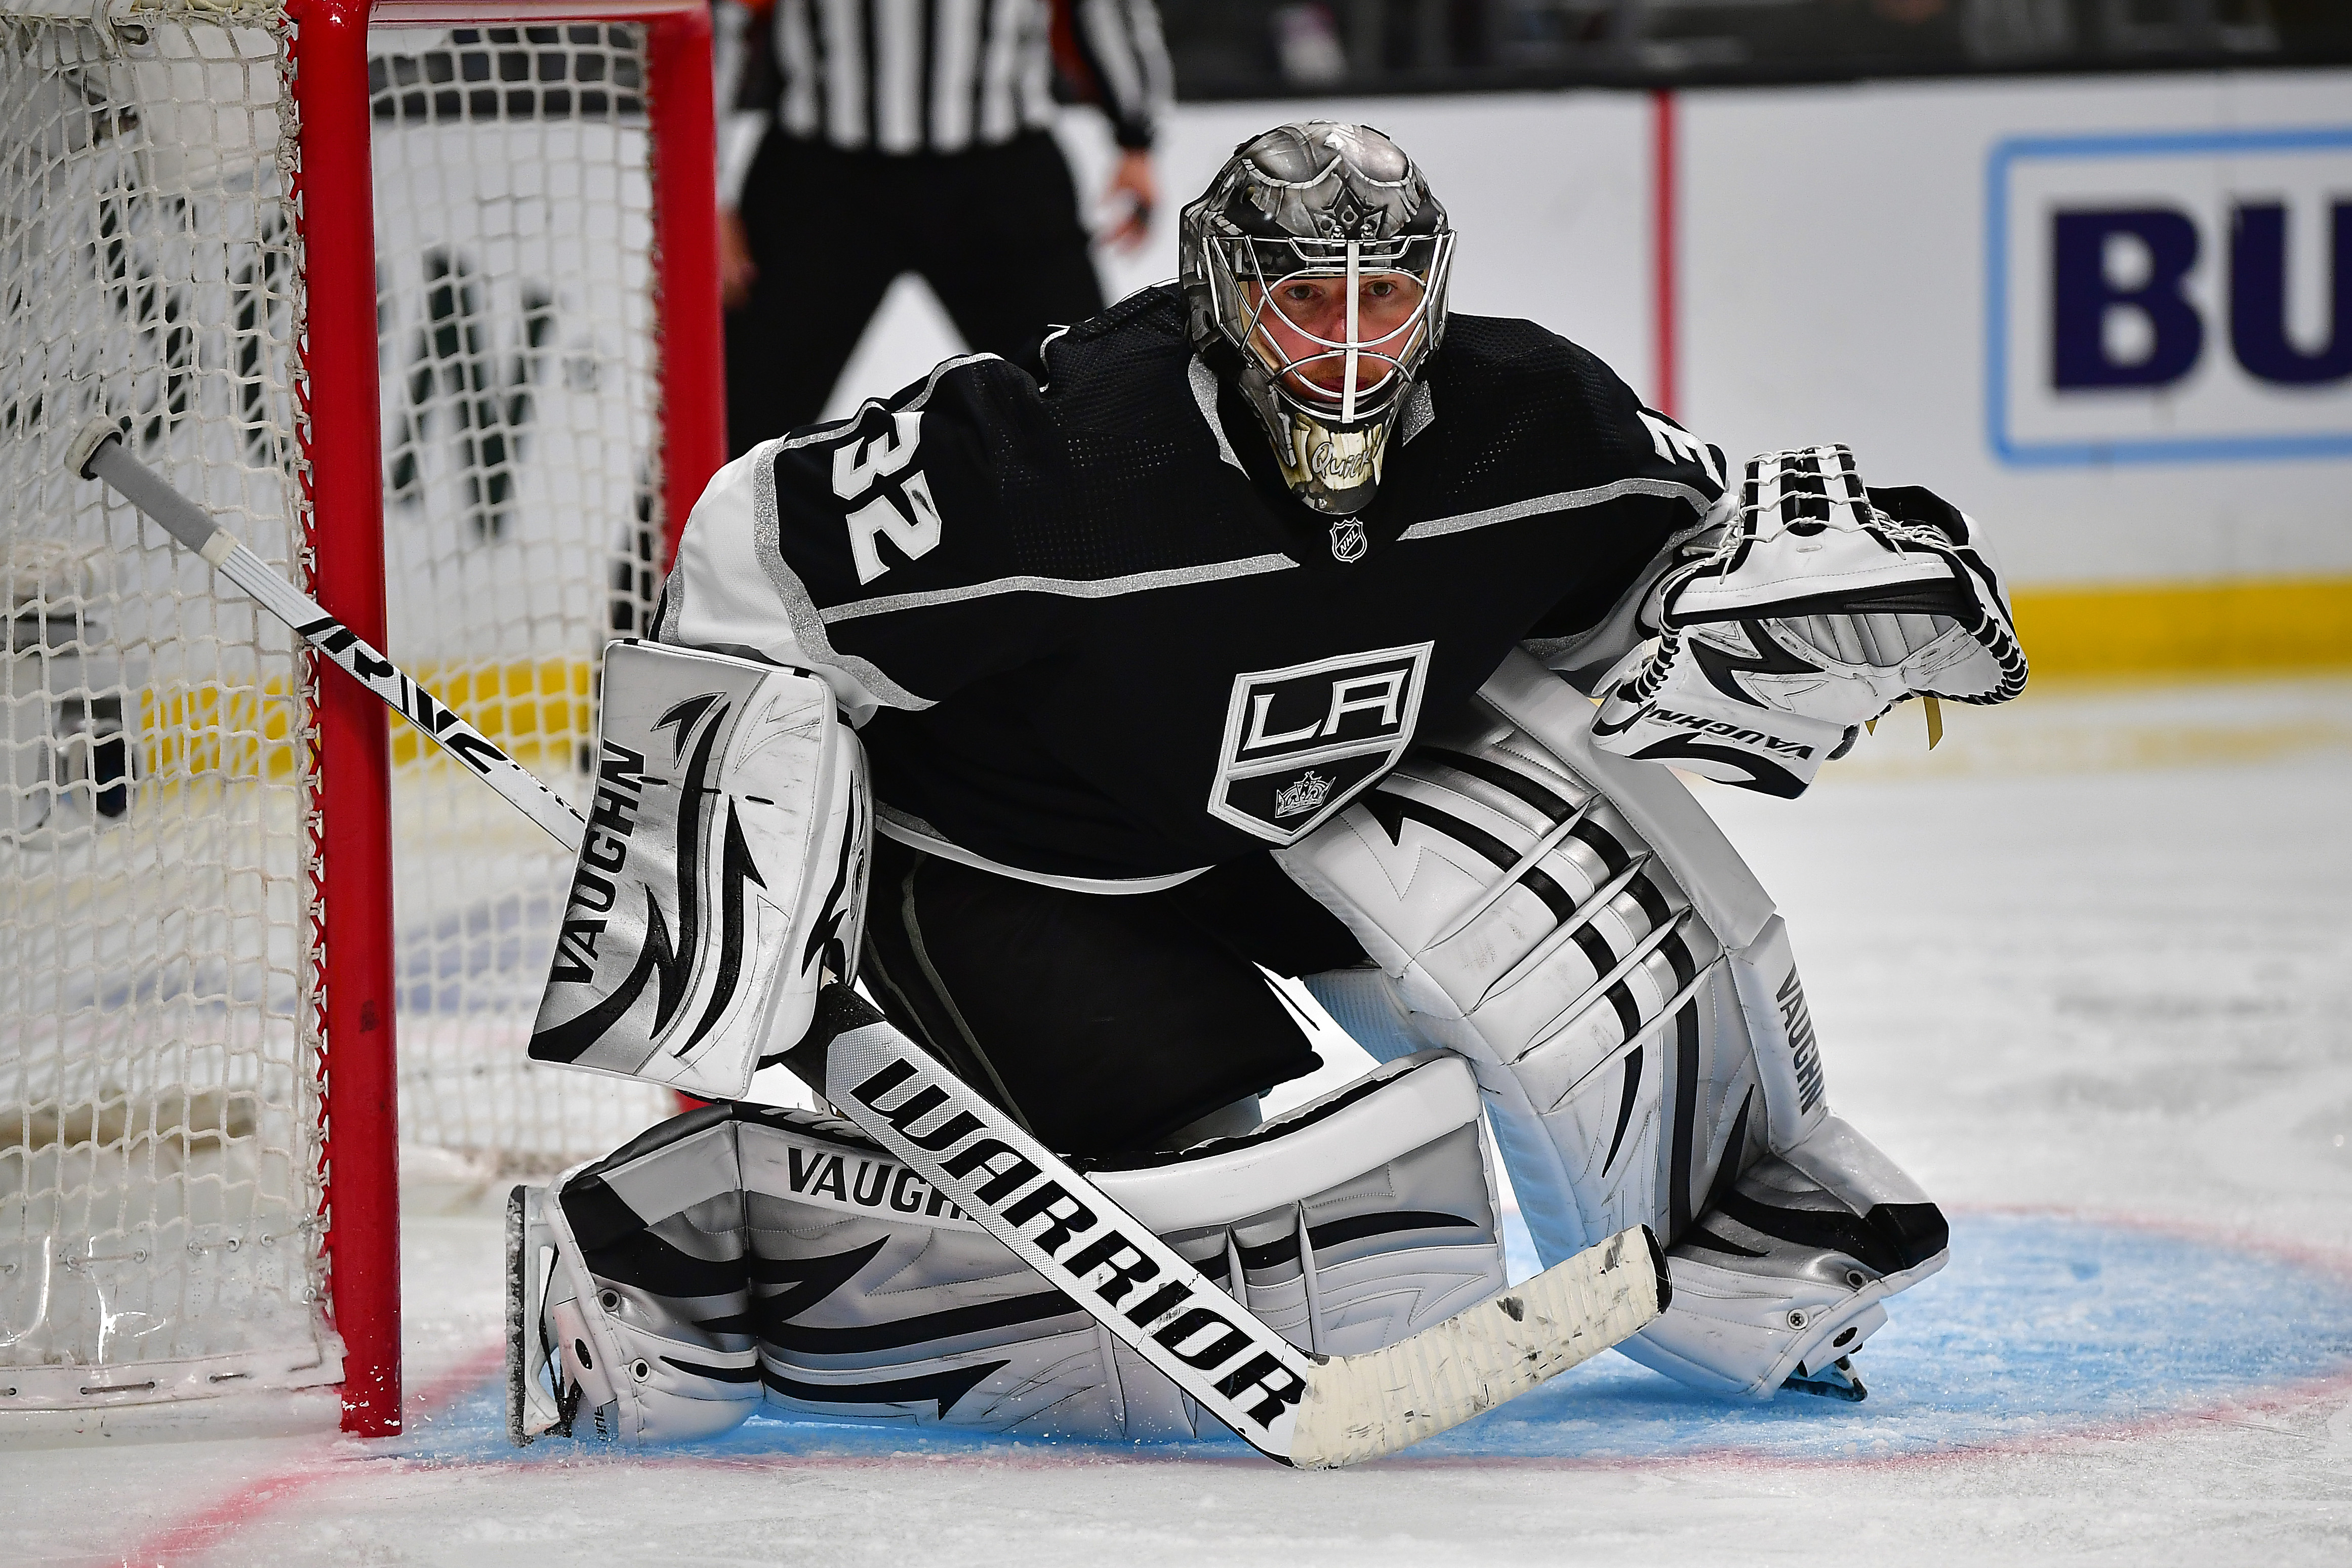 10 Minutes of Jonathan Quick Highlights 